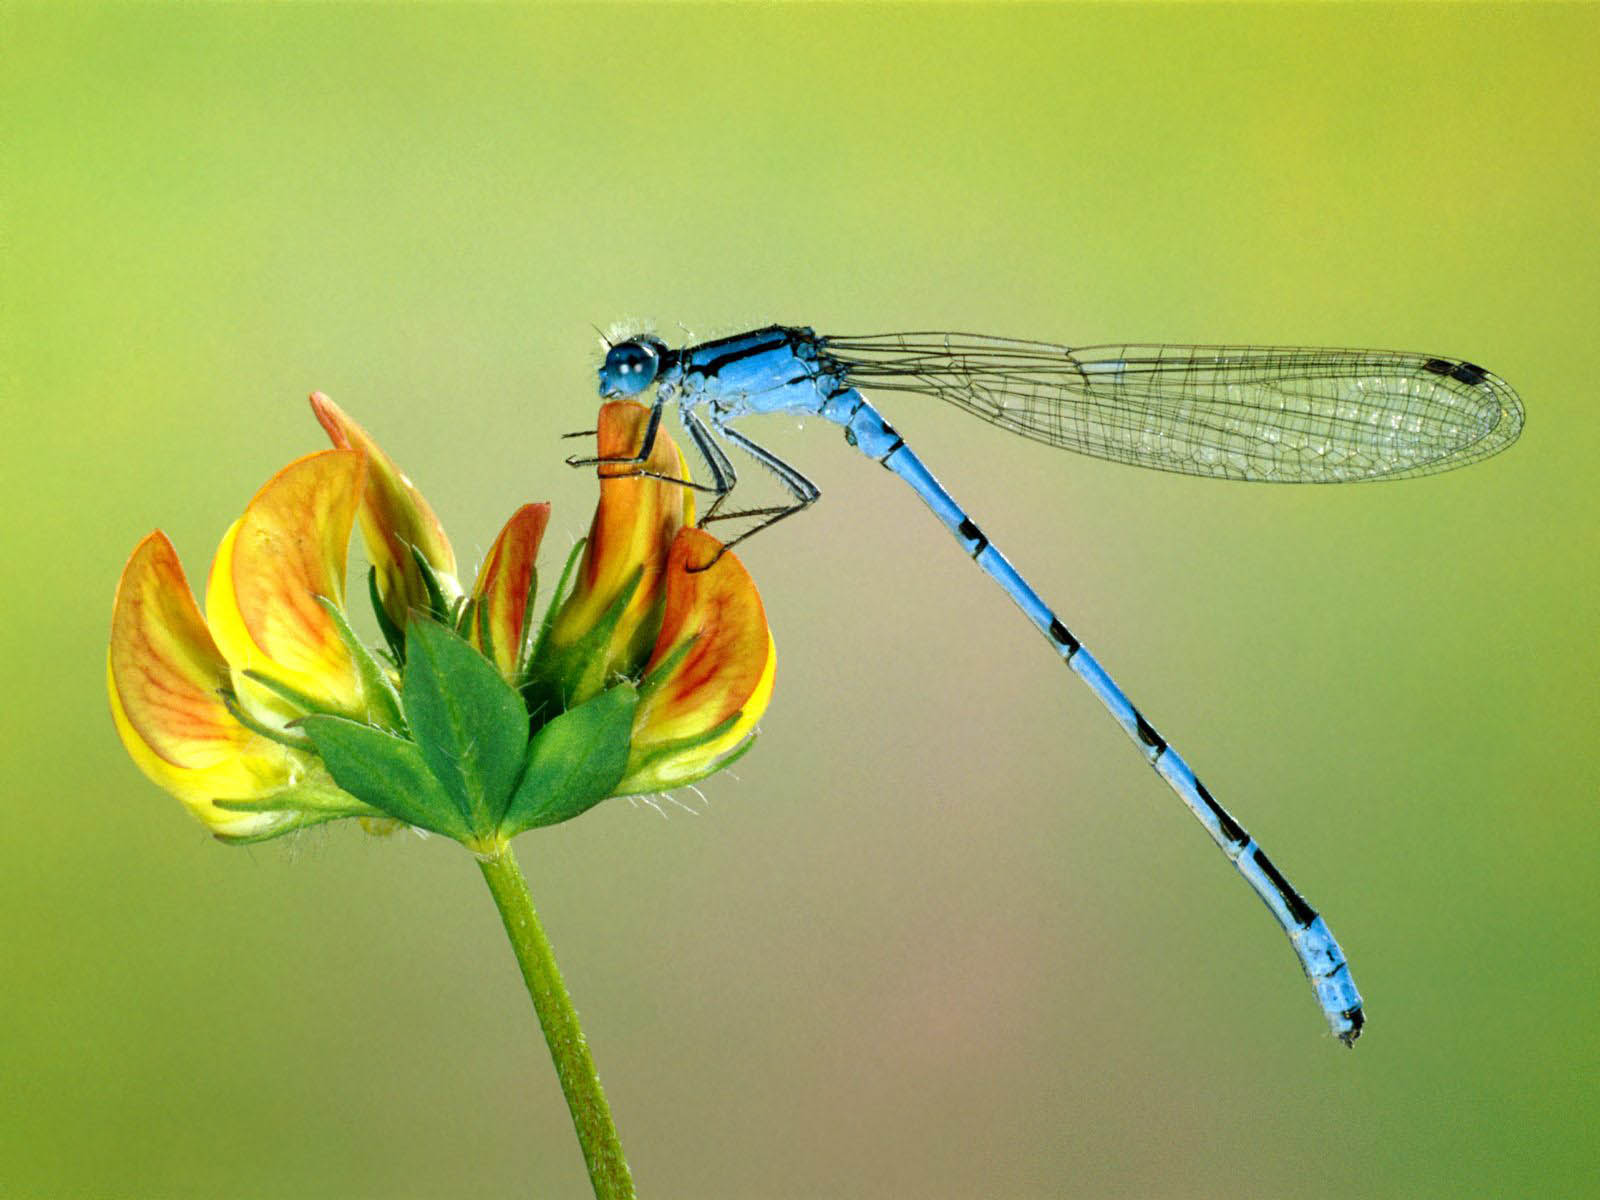 Tag Dragonfly Wallpaper Background Photos Image And Pictures For